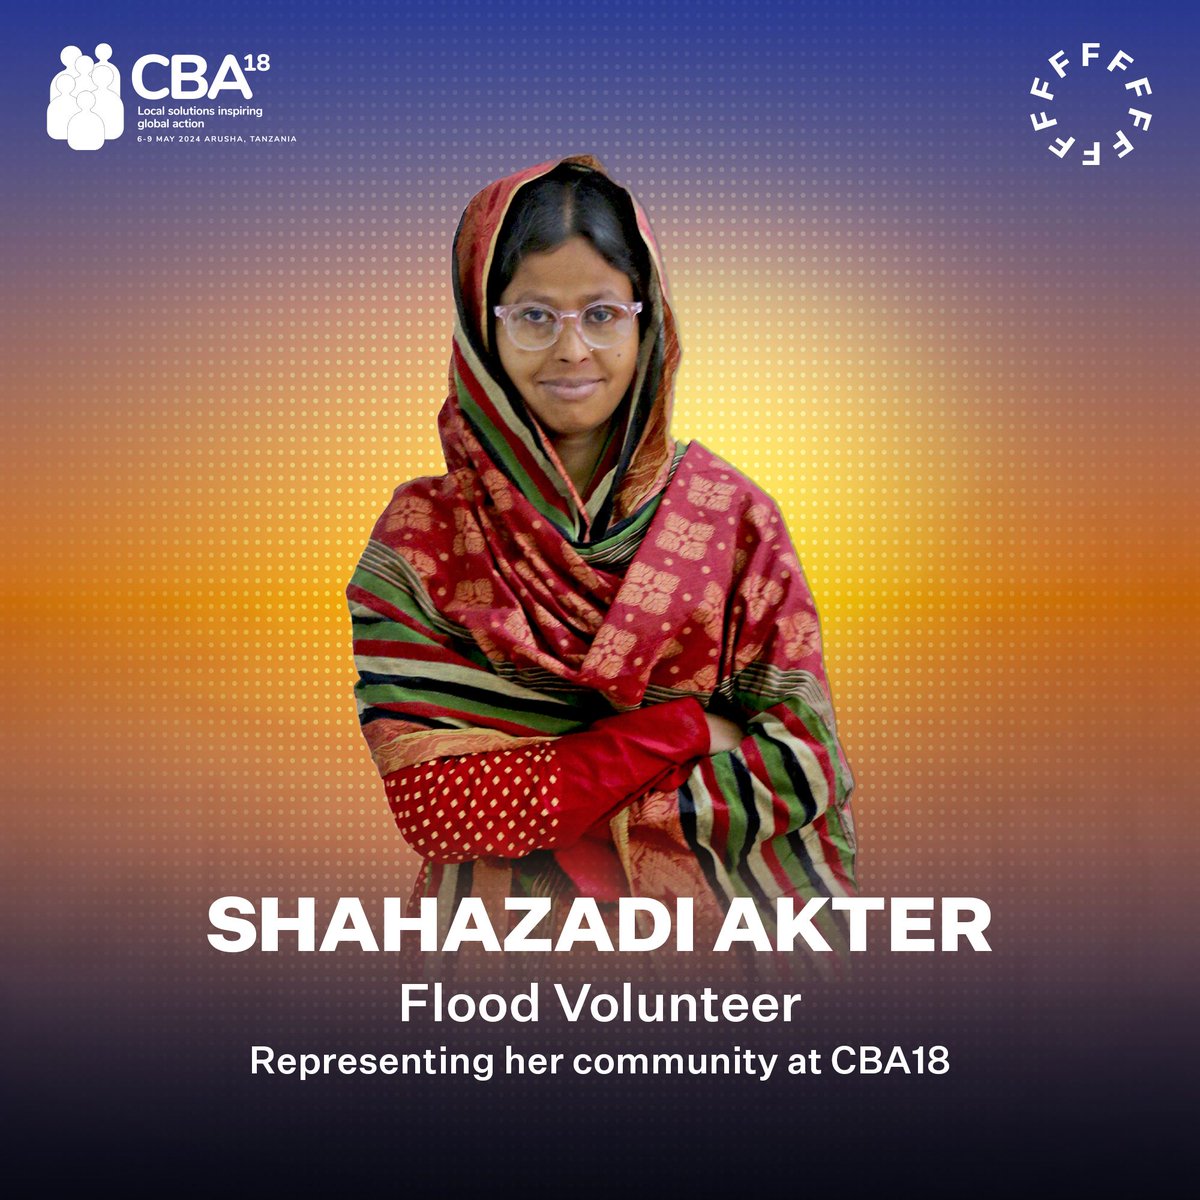 From the Chars to CBA18 Hailing from Bojrar Char, a river-island in northern Bangladesh, we have youth #FloodVolunteer Shahazadi Akter representing her community and heroic peers at #CBA18 in Tanzania. #LLA #Volunteer #SavingLives #SDG13 @iied @runakhan_ed